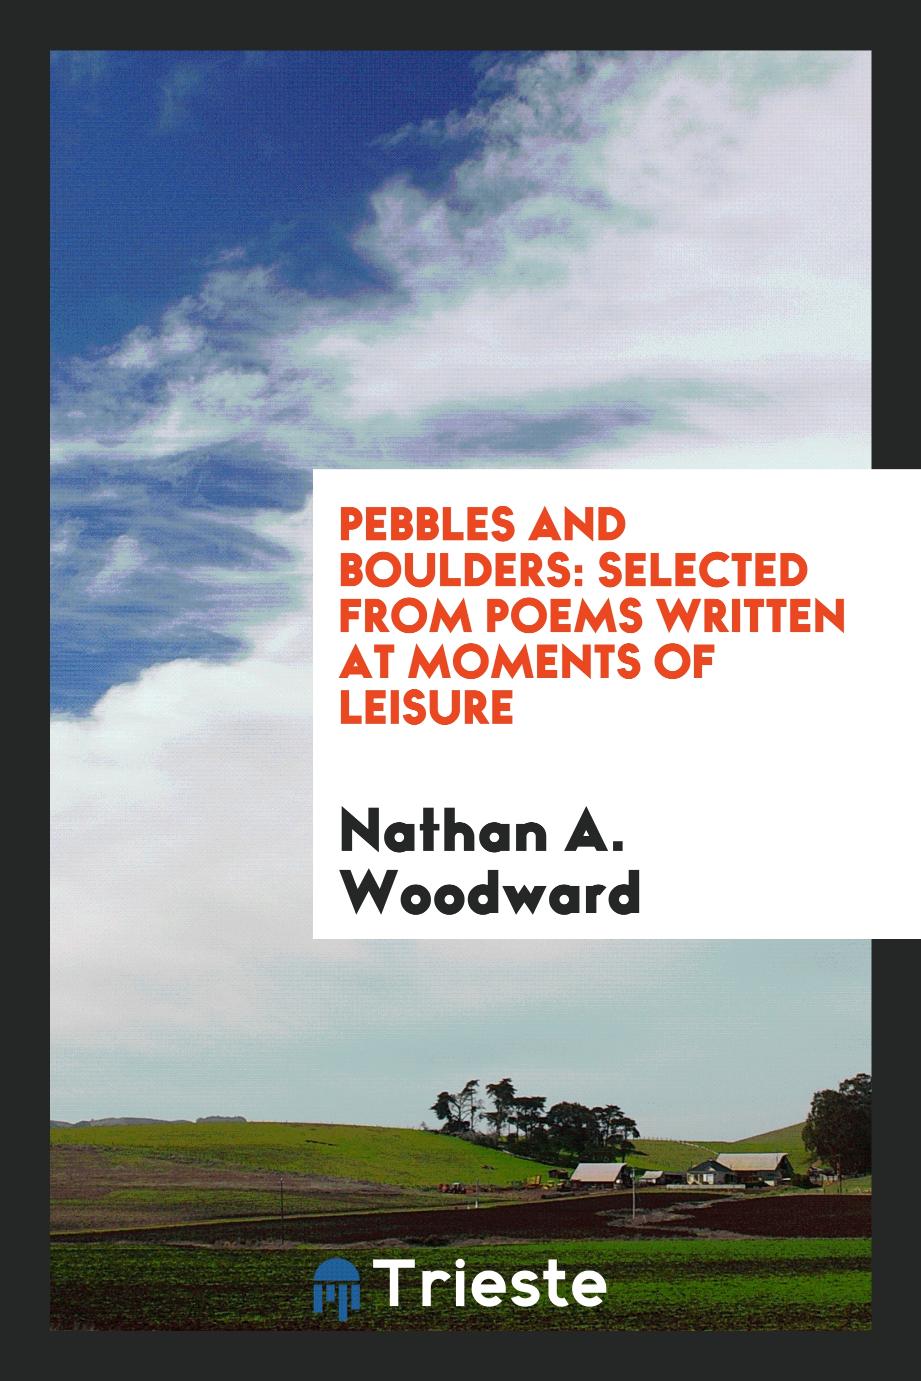 Pebbles and Boulders: Selected from Poems Written at Moments of Leisure